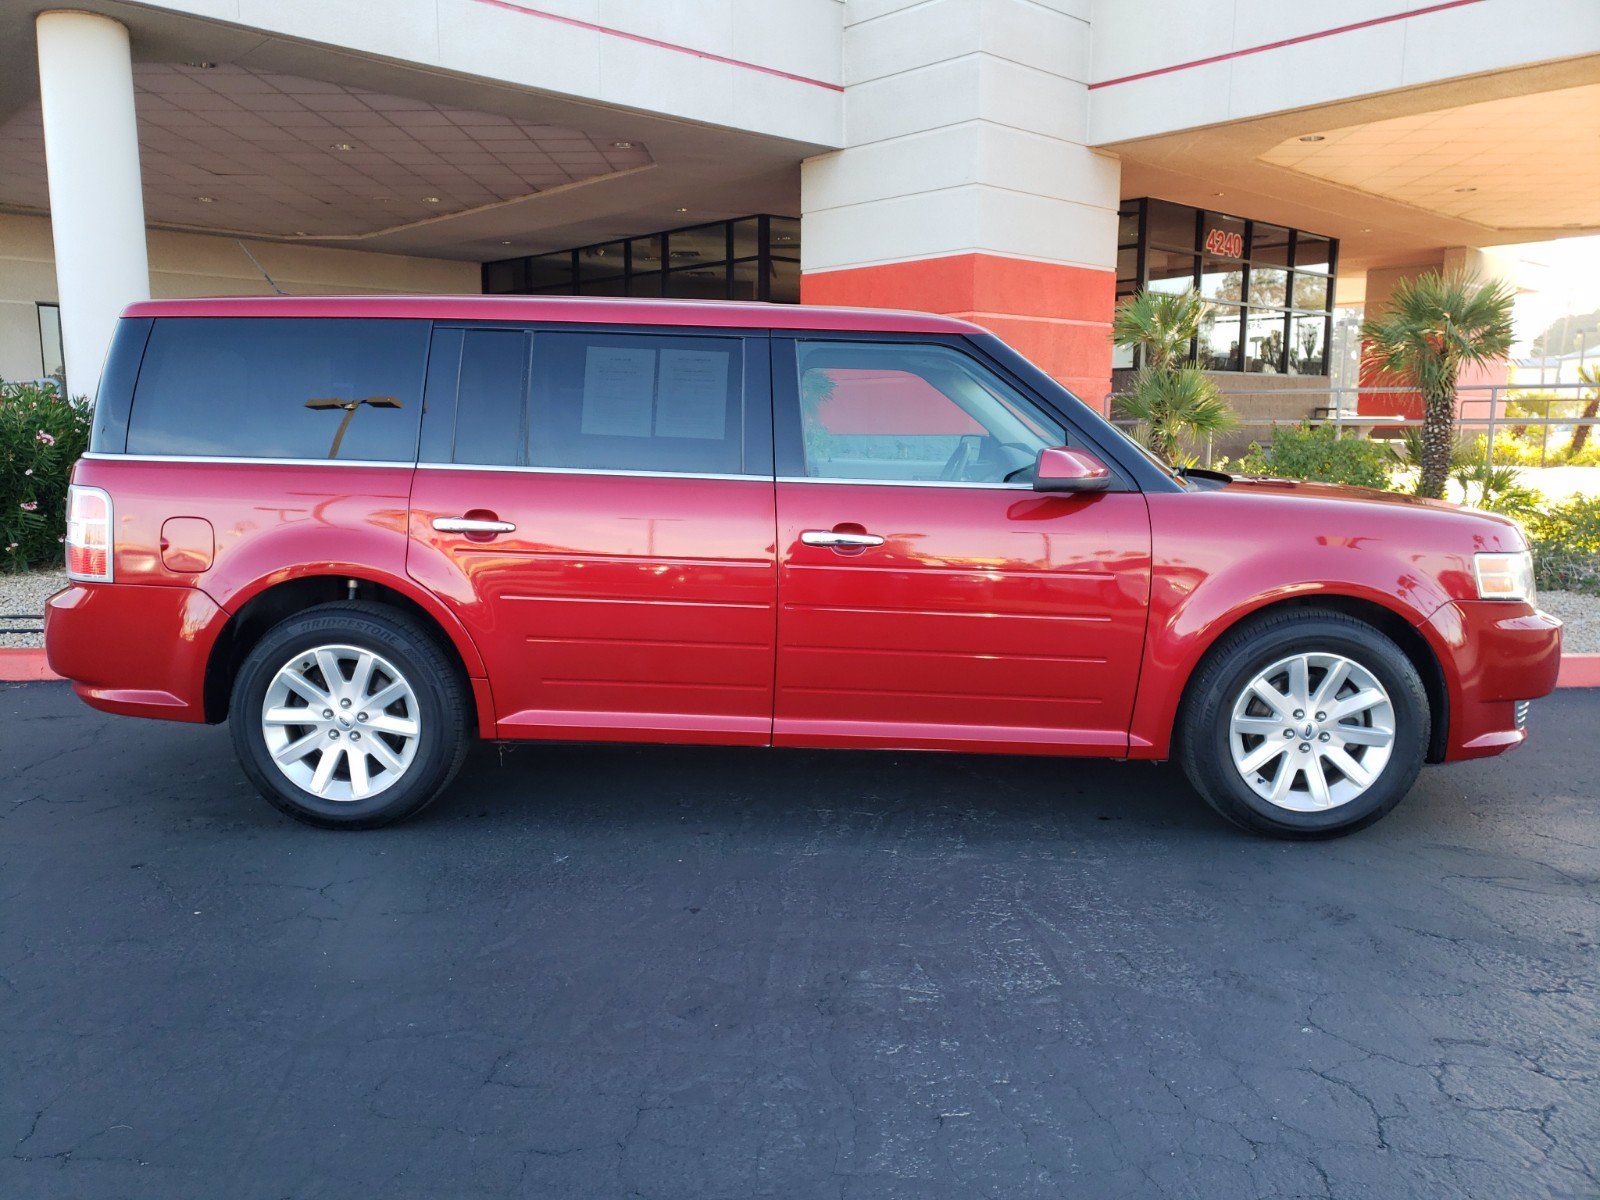 The 2010 Ford Flex.